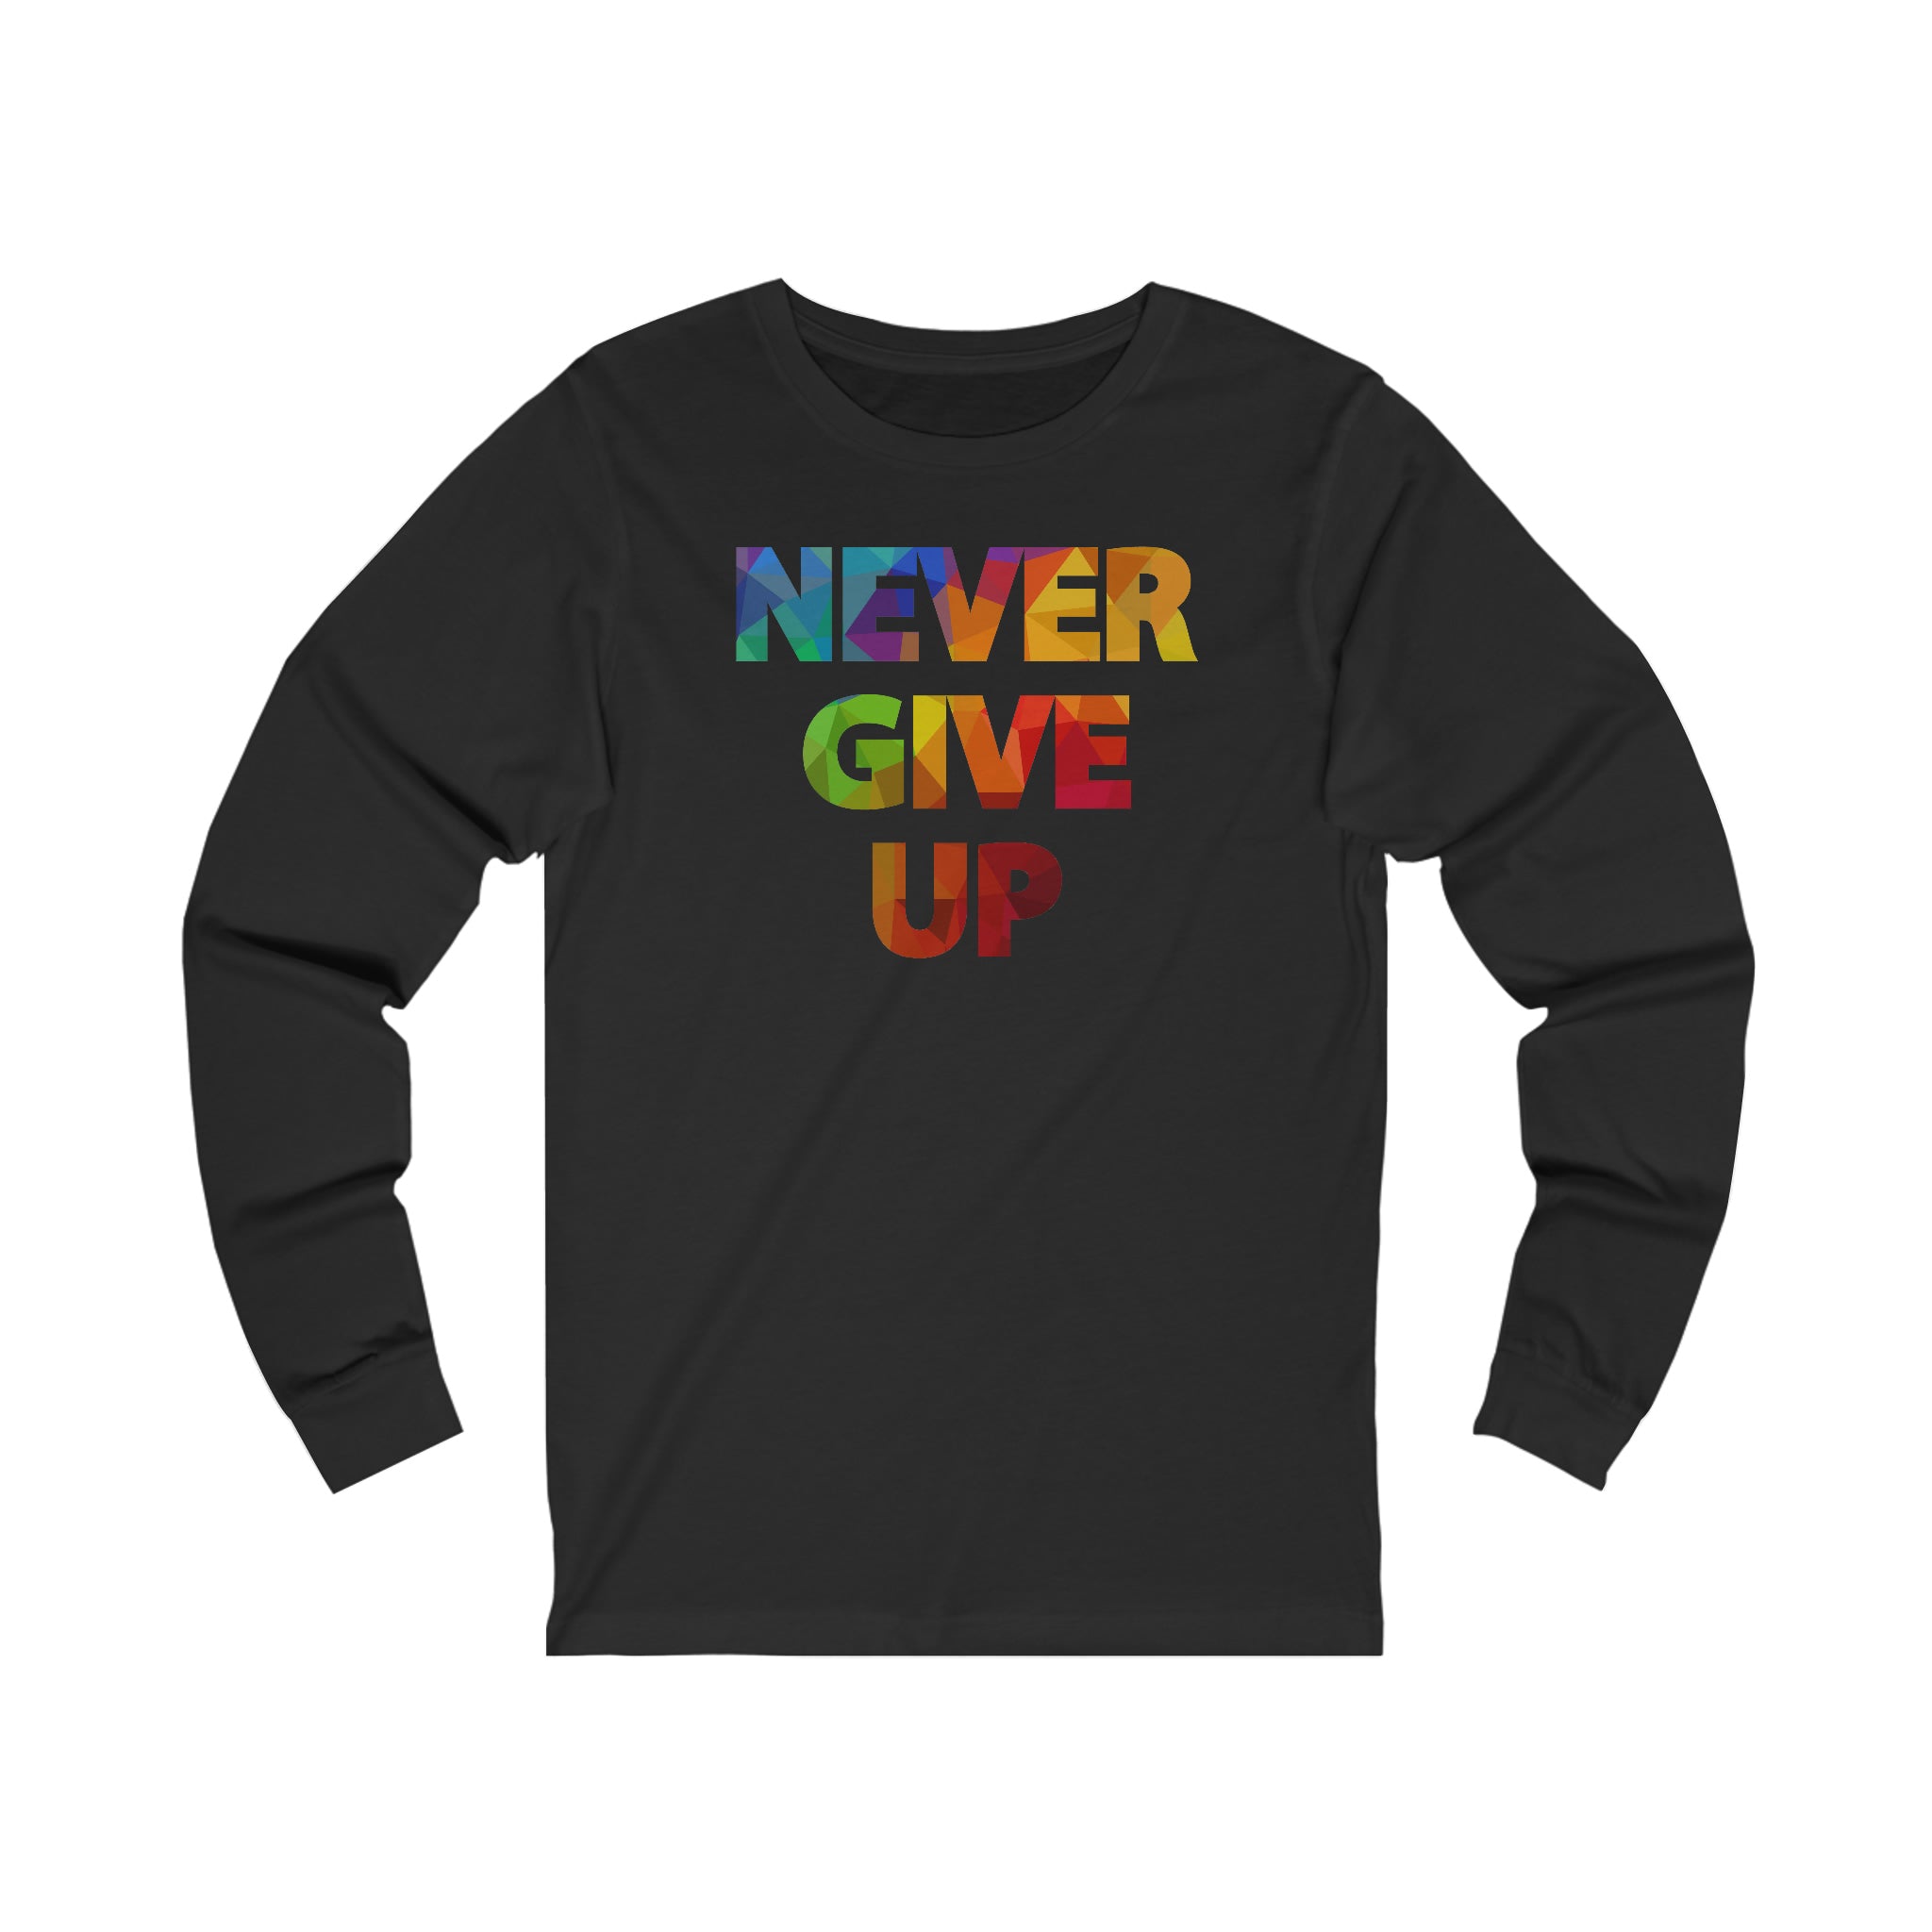 "Never Give Up" Unisex Jersey Long Sleeve Tee - 8 colors